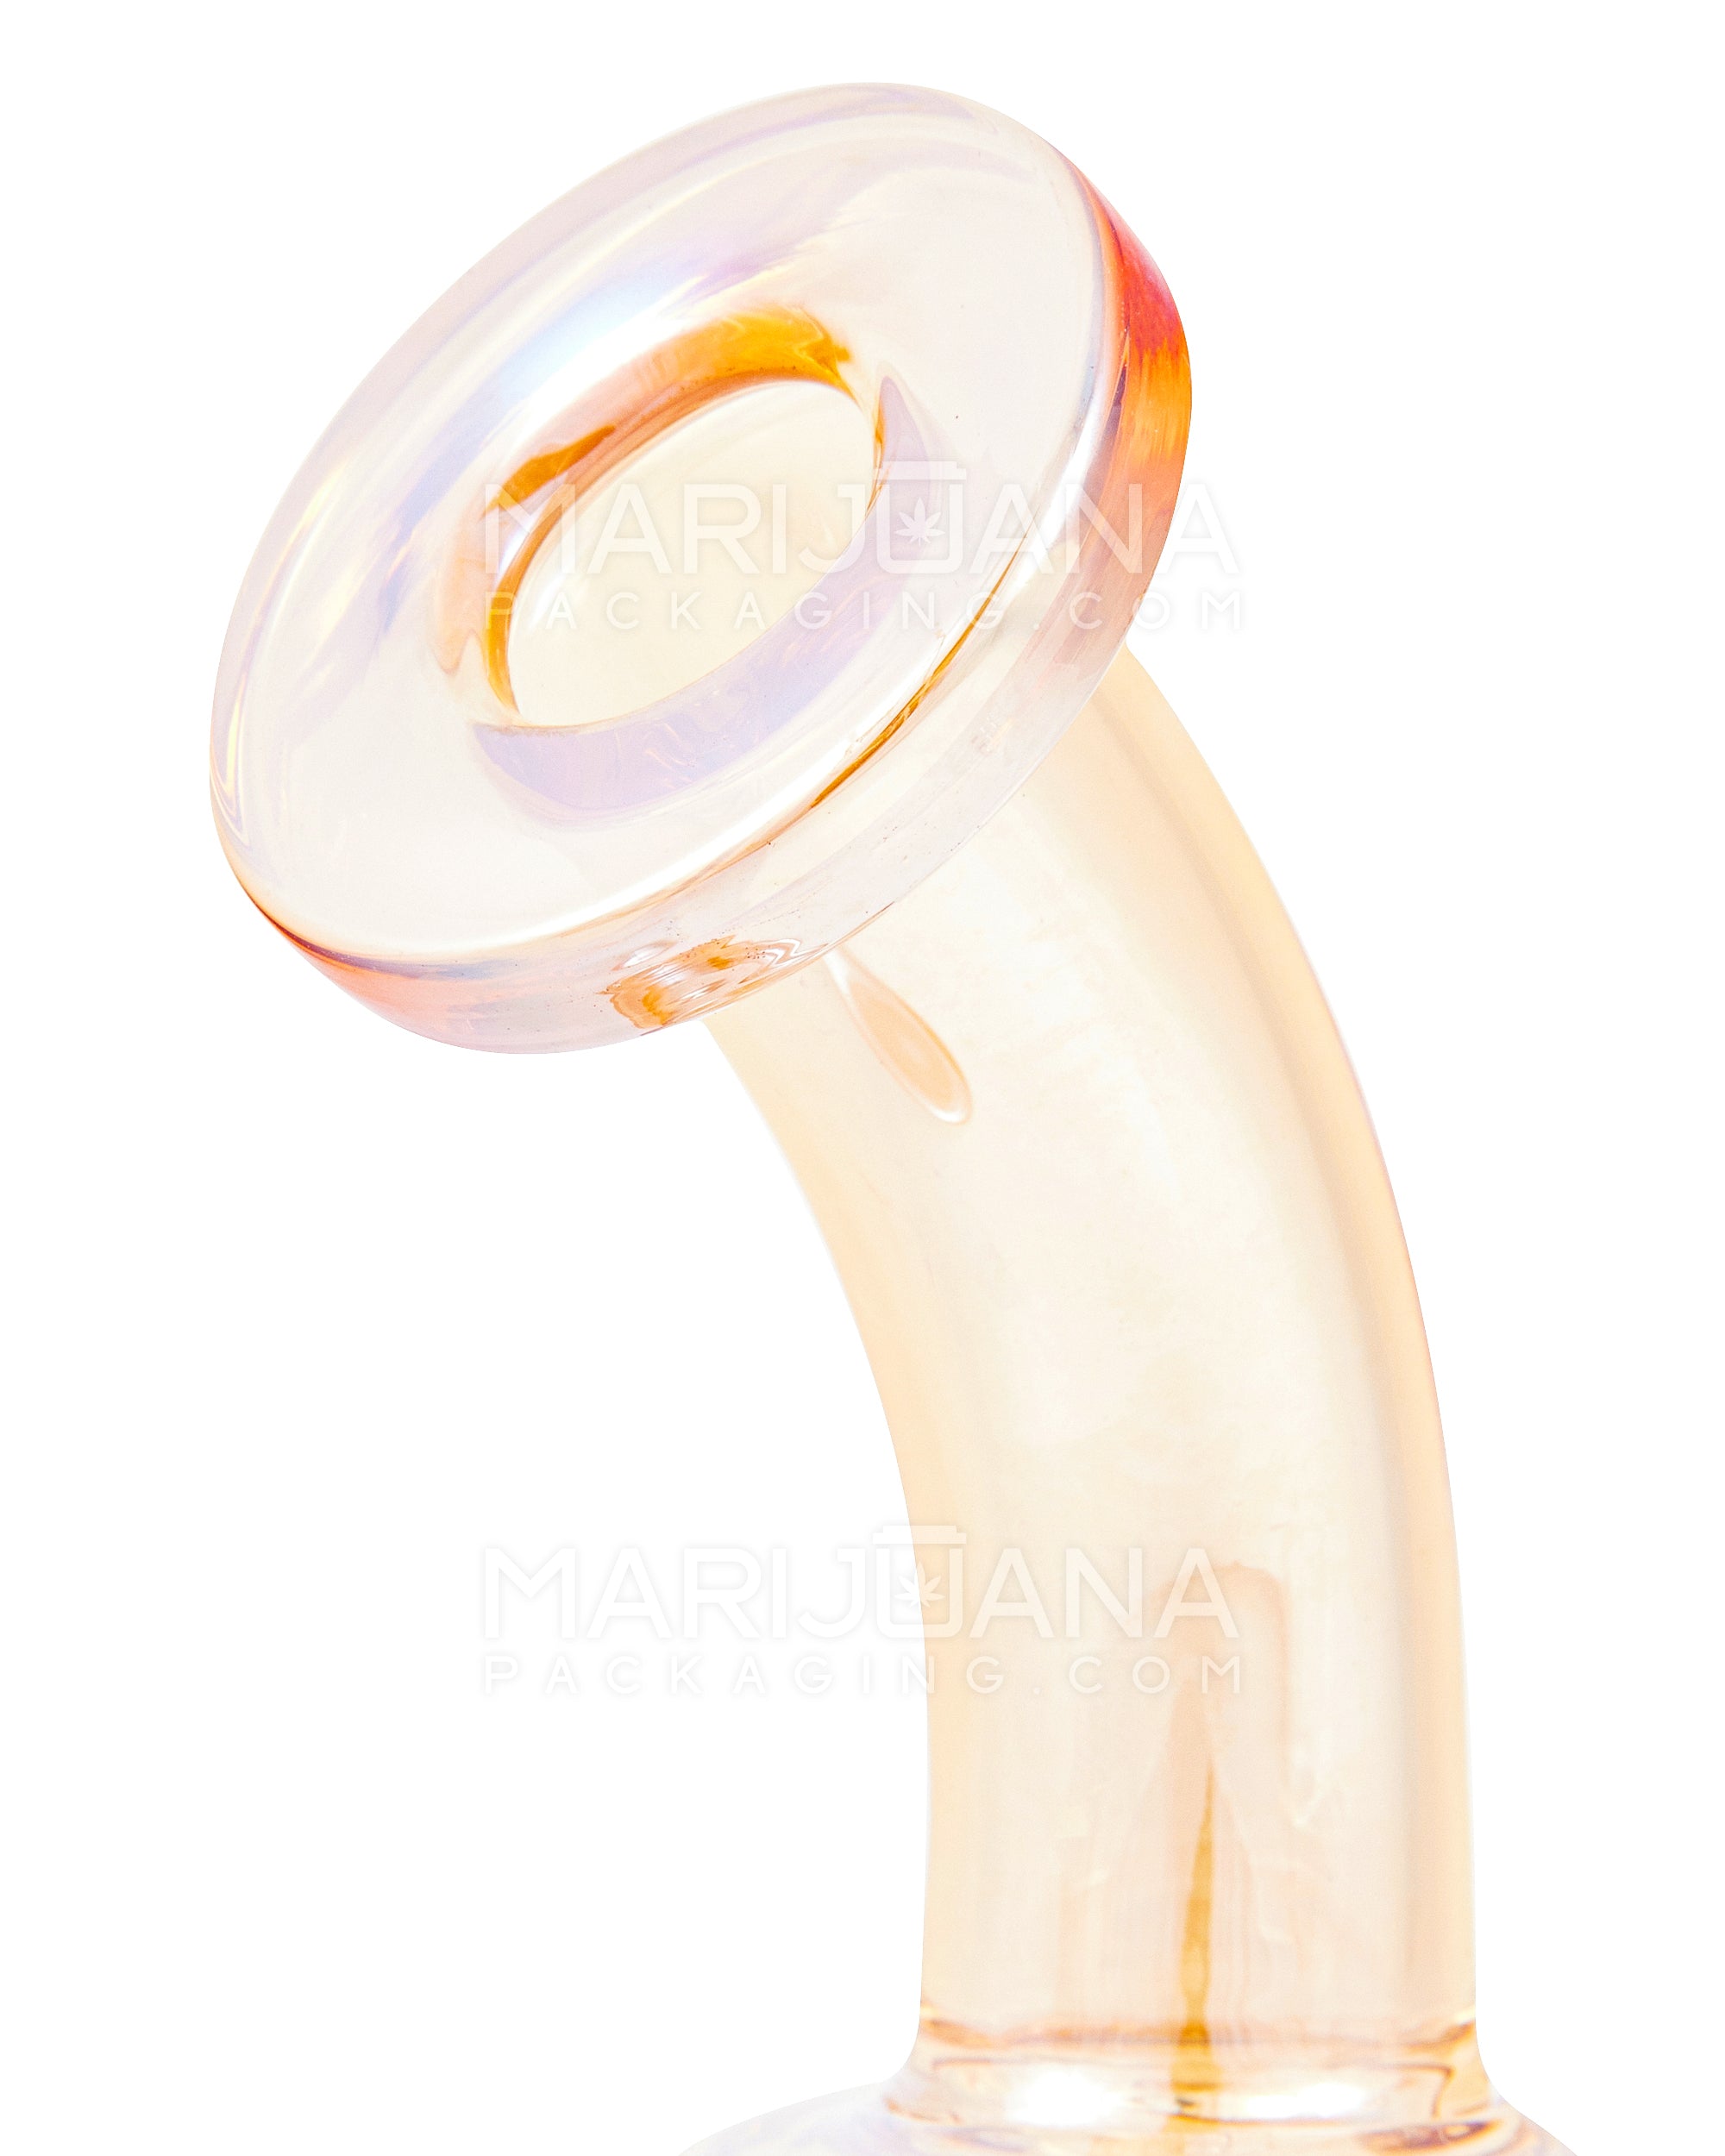 Bent Neck Iridescent Glass Dab Rig | 6in Tall - 14mm Banger - Amber - 4